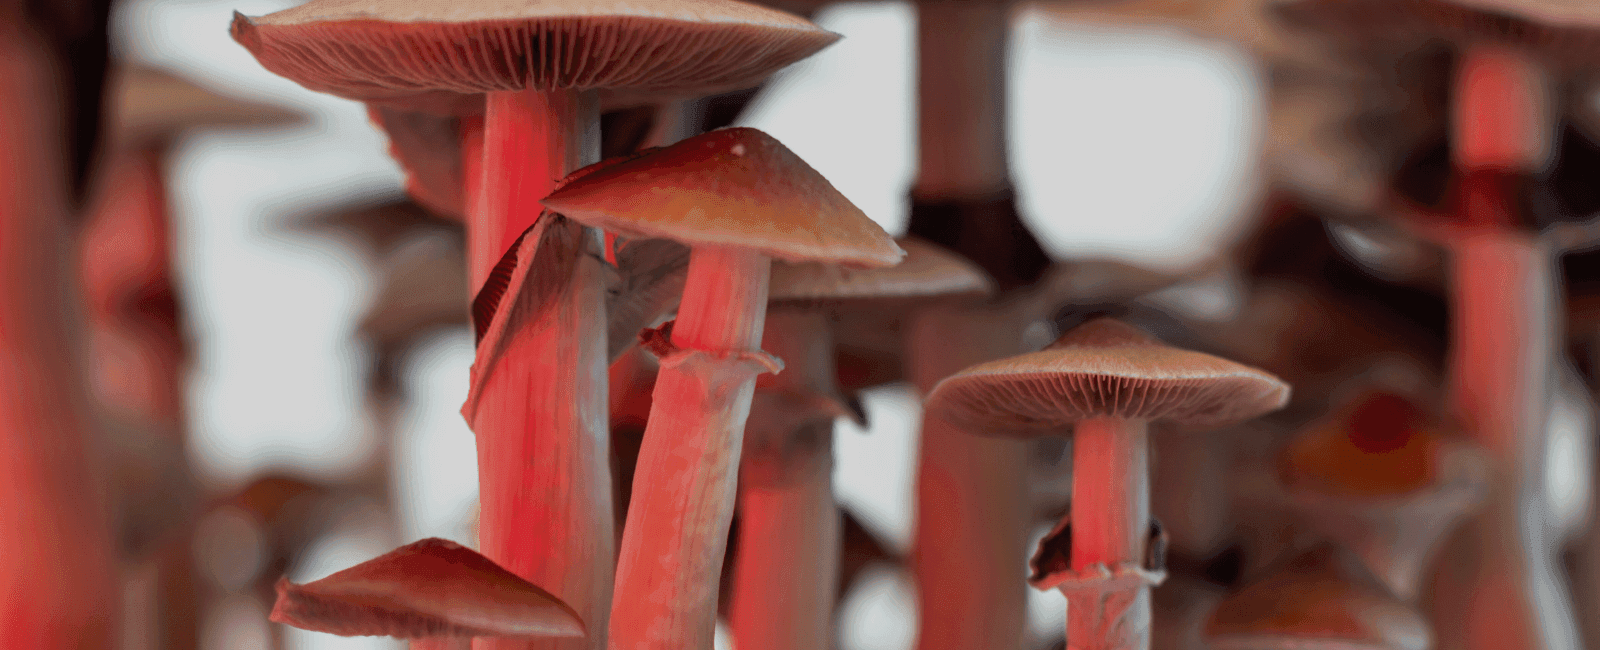 Federal Health Agency Recognizes Psilocybin's Benefits, Announces New Psychedelic Research